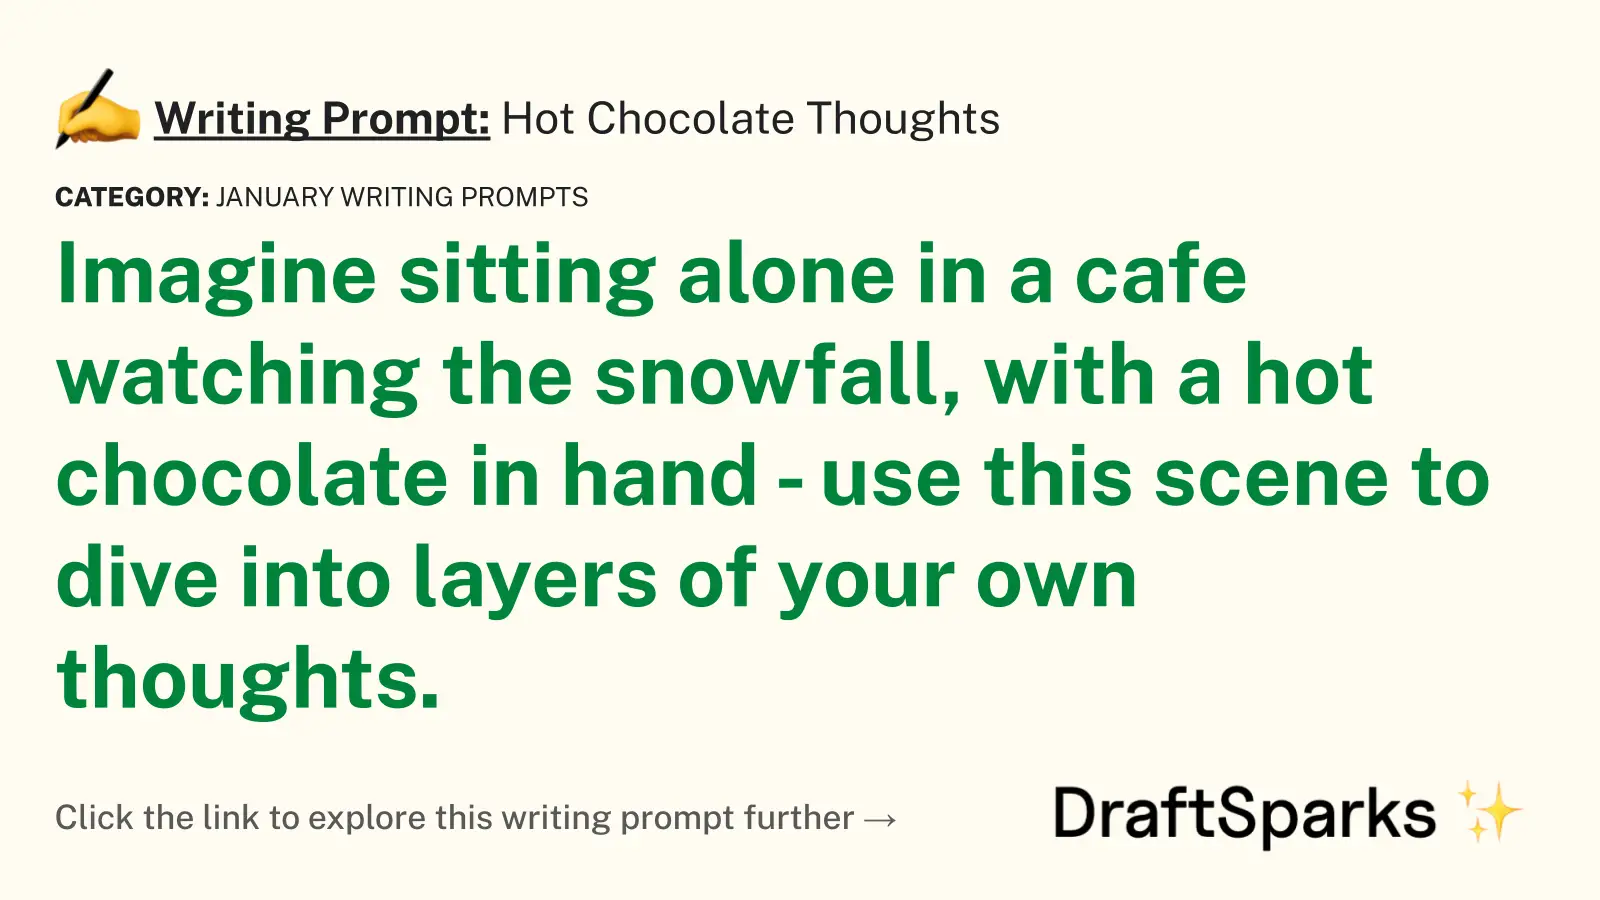 Hot Chocolate Thoughts